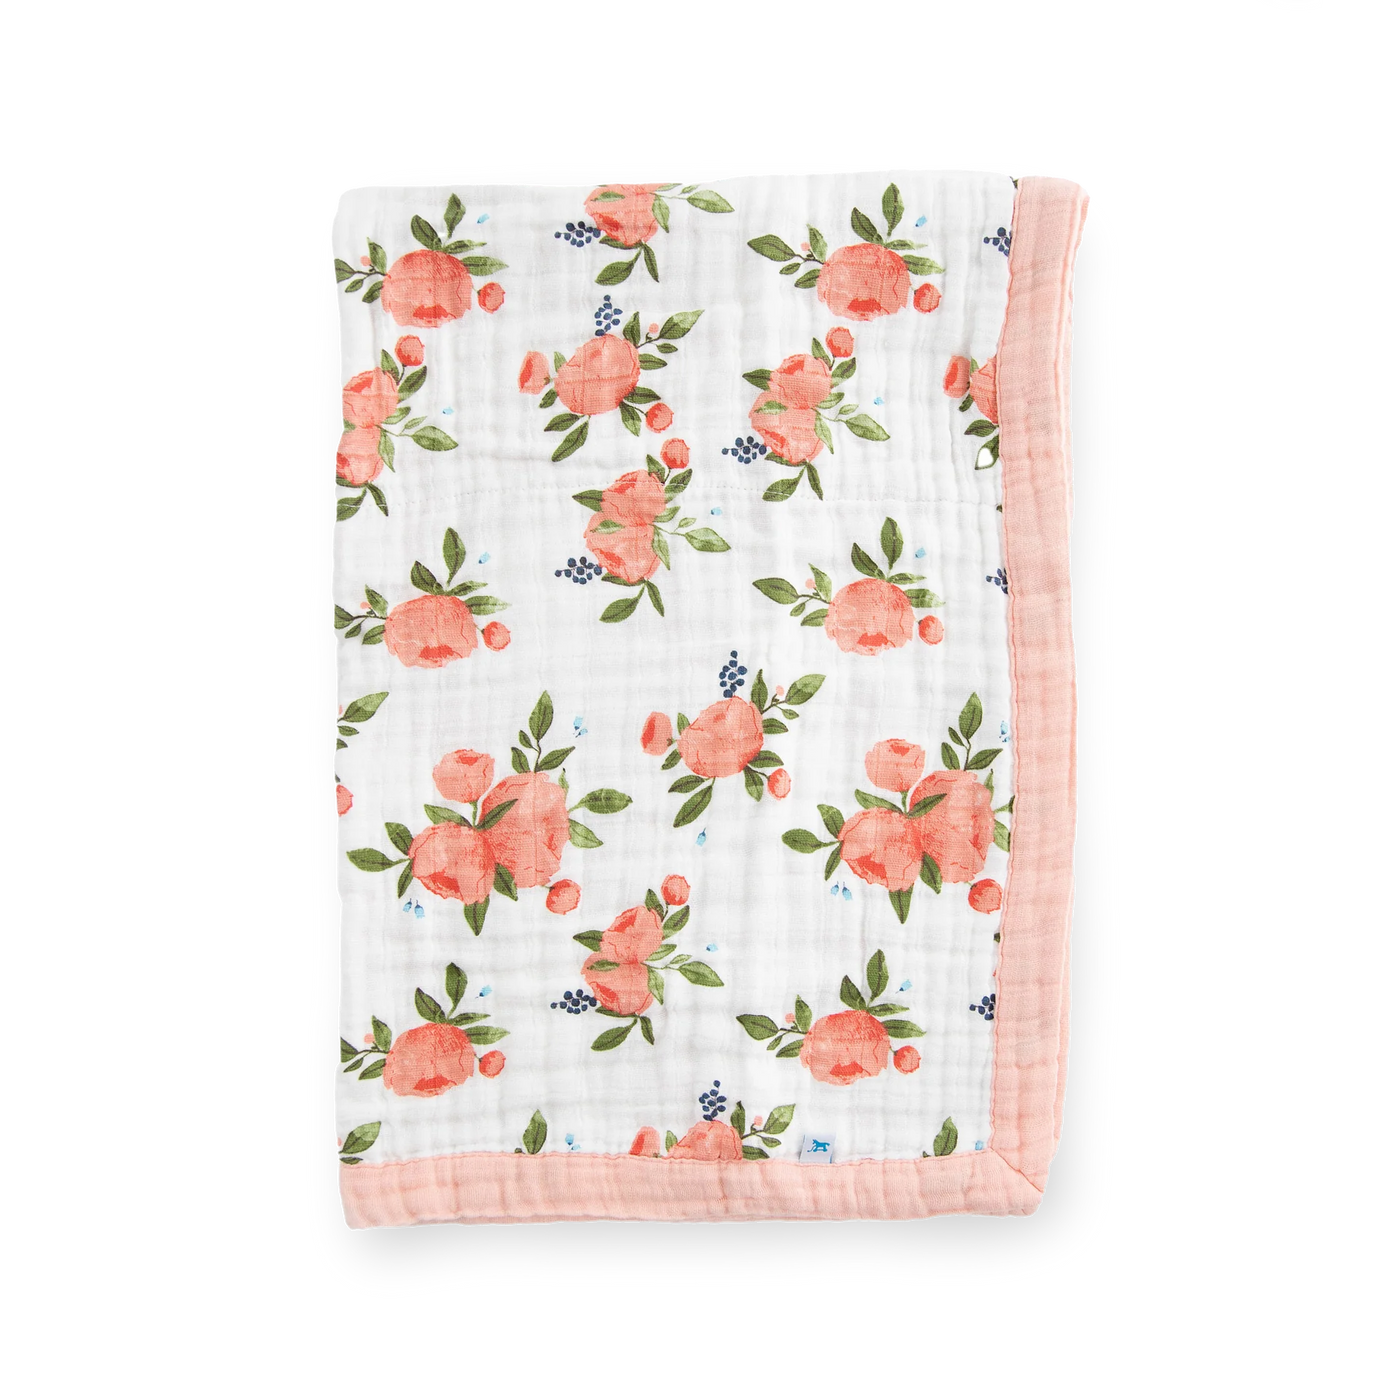 Cotton Muslin Baby Quilt - Watercolor Roses